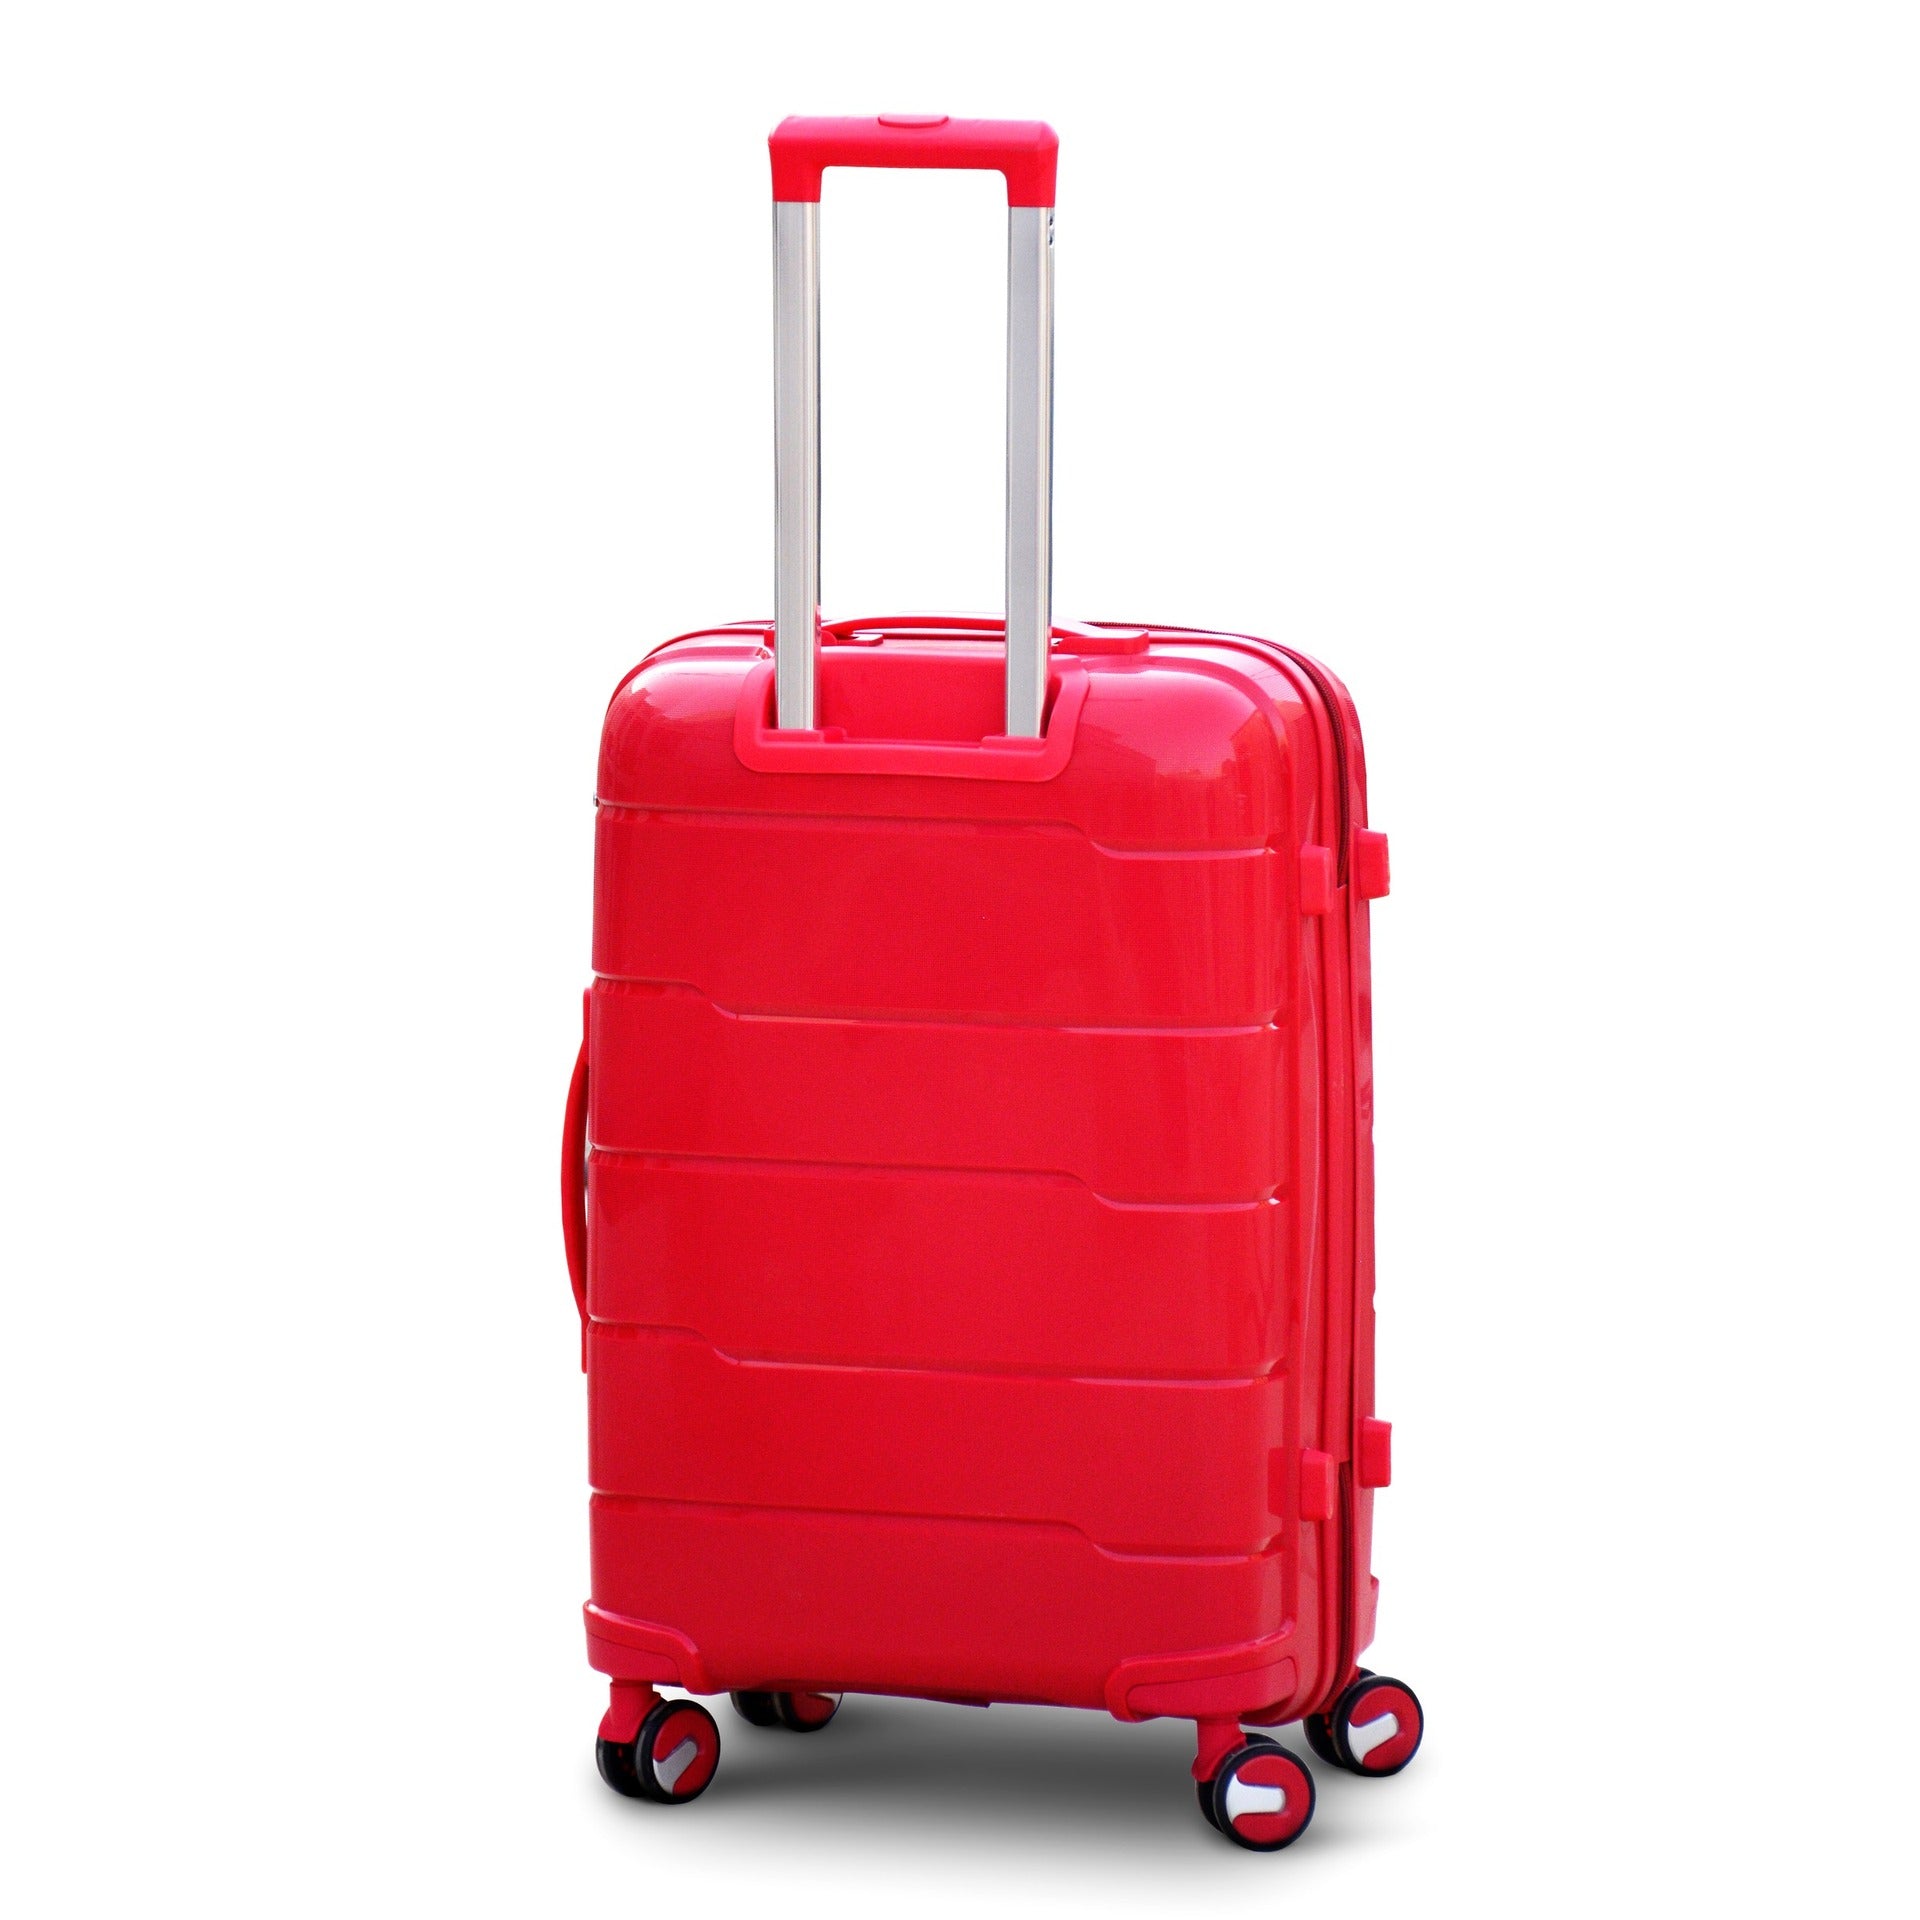 28" Red Colour Non Expandable Ceramic smooth PP Luggage Lightweight Hard Case Trolley Bag with Double Spinner Wheel